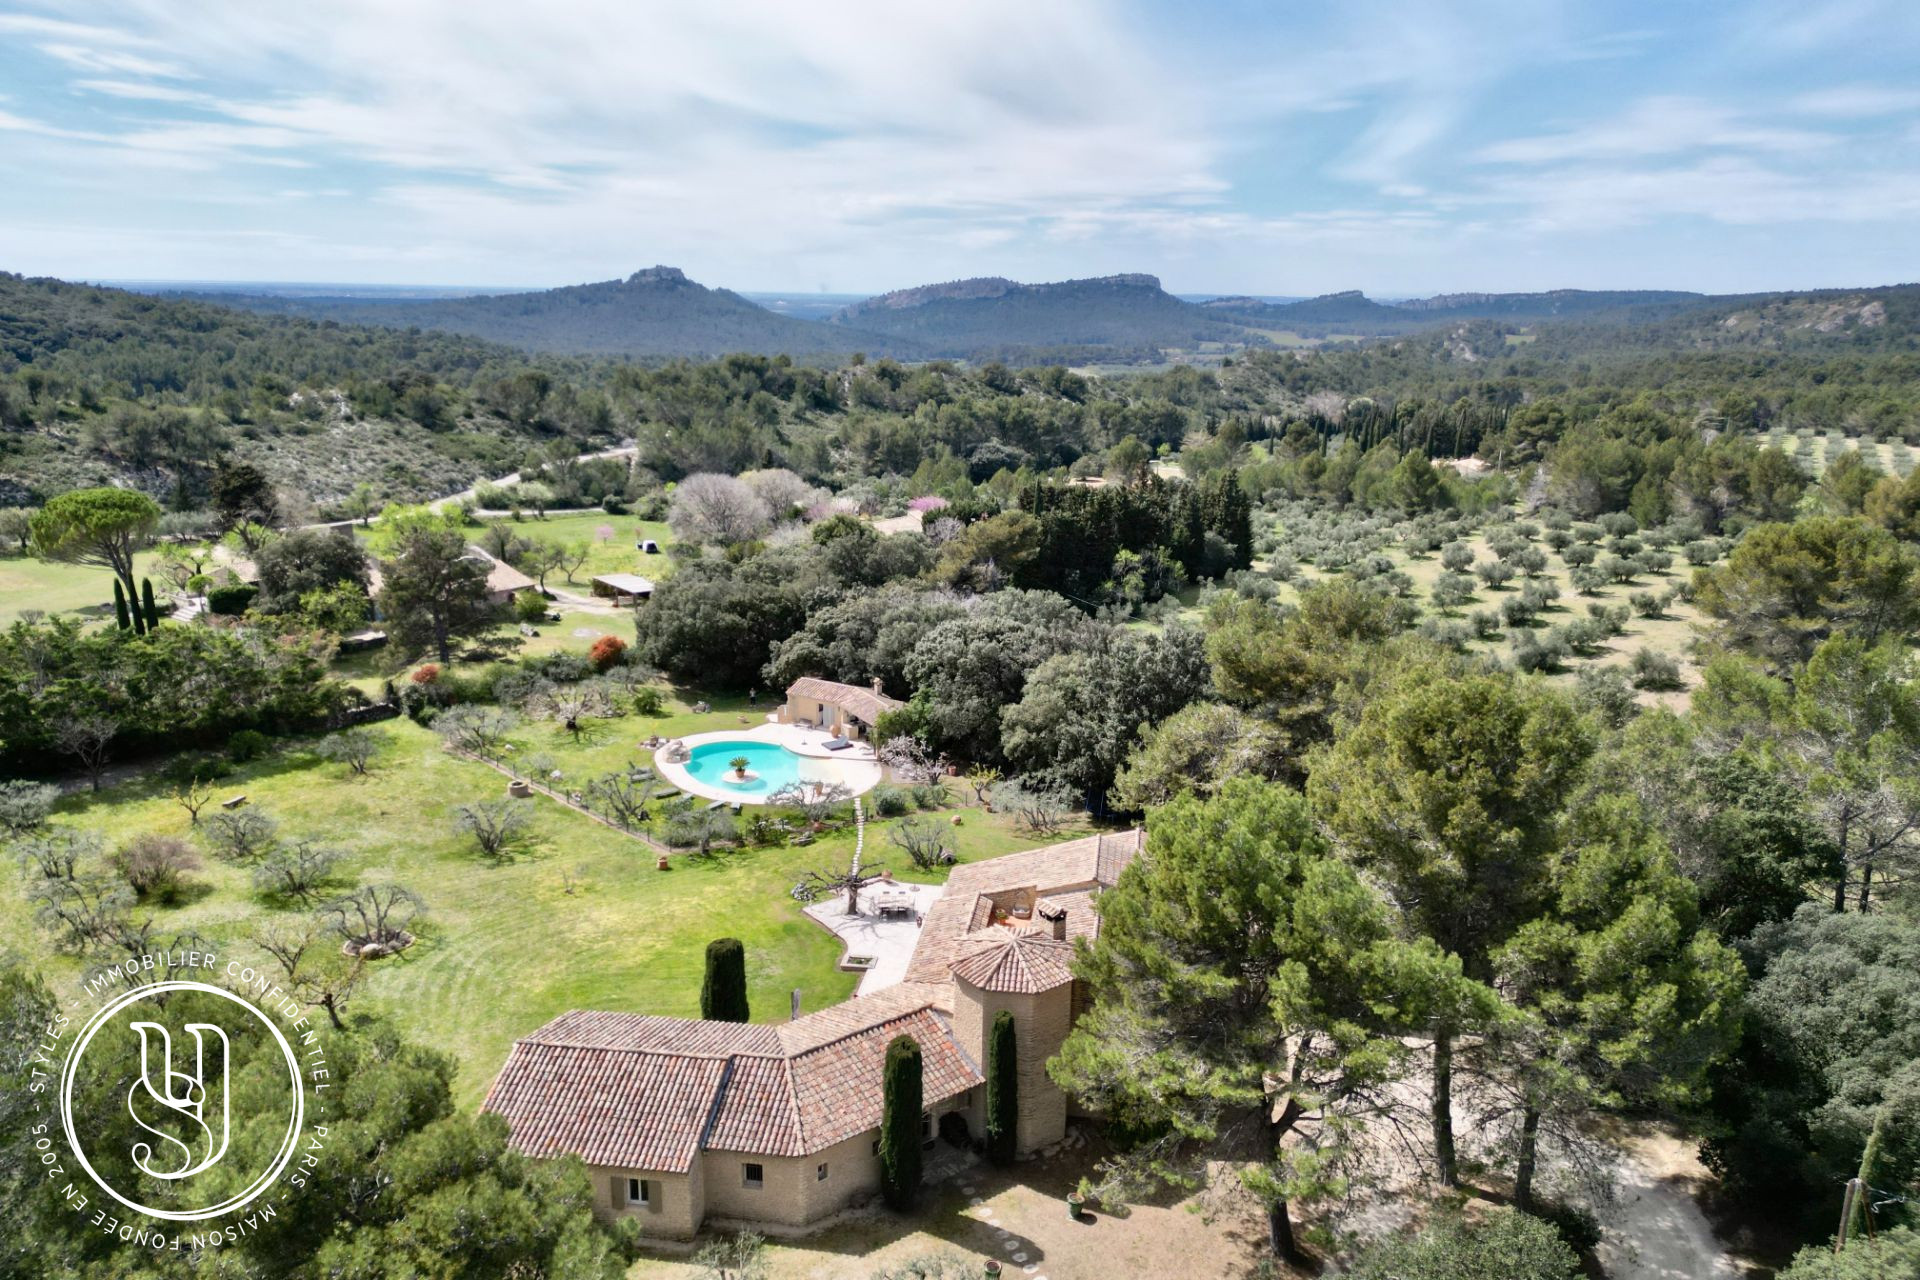 Les Baux-de-Provence - , a quiet property, in a natural and preserved setting. - image 1